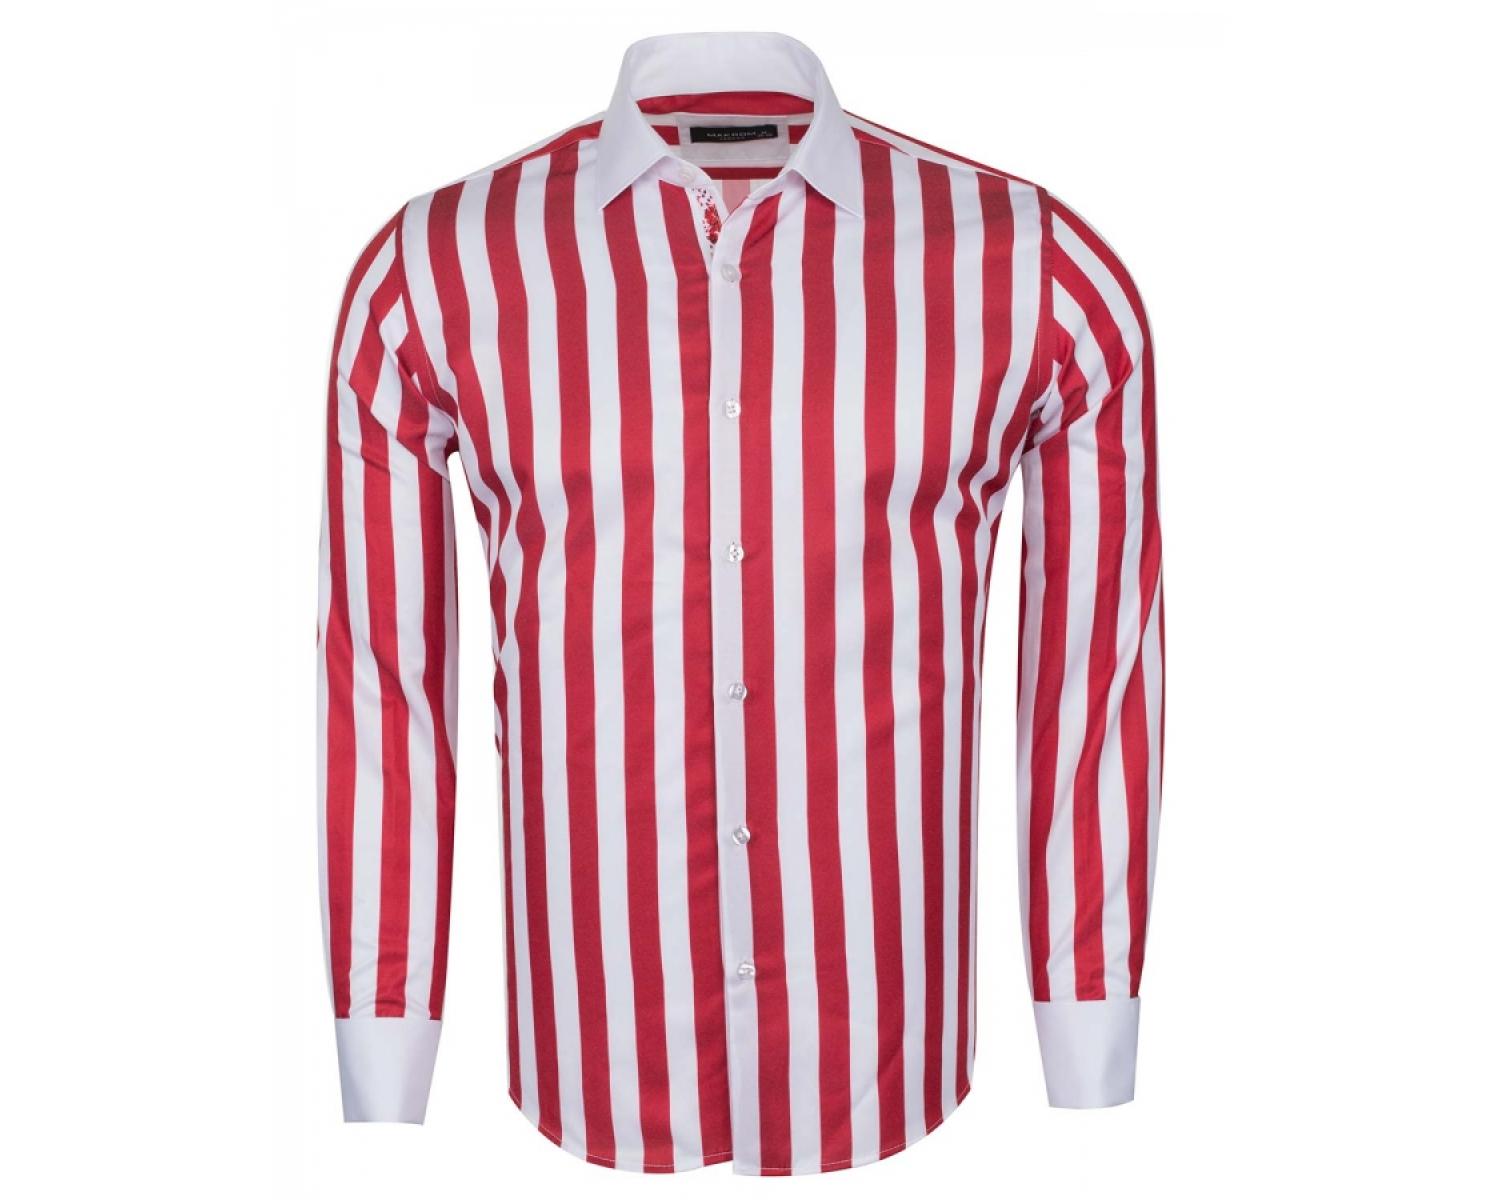 SL 6521 Men's white & red striped double cuff shirt - Quality Designed ...